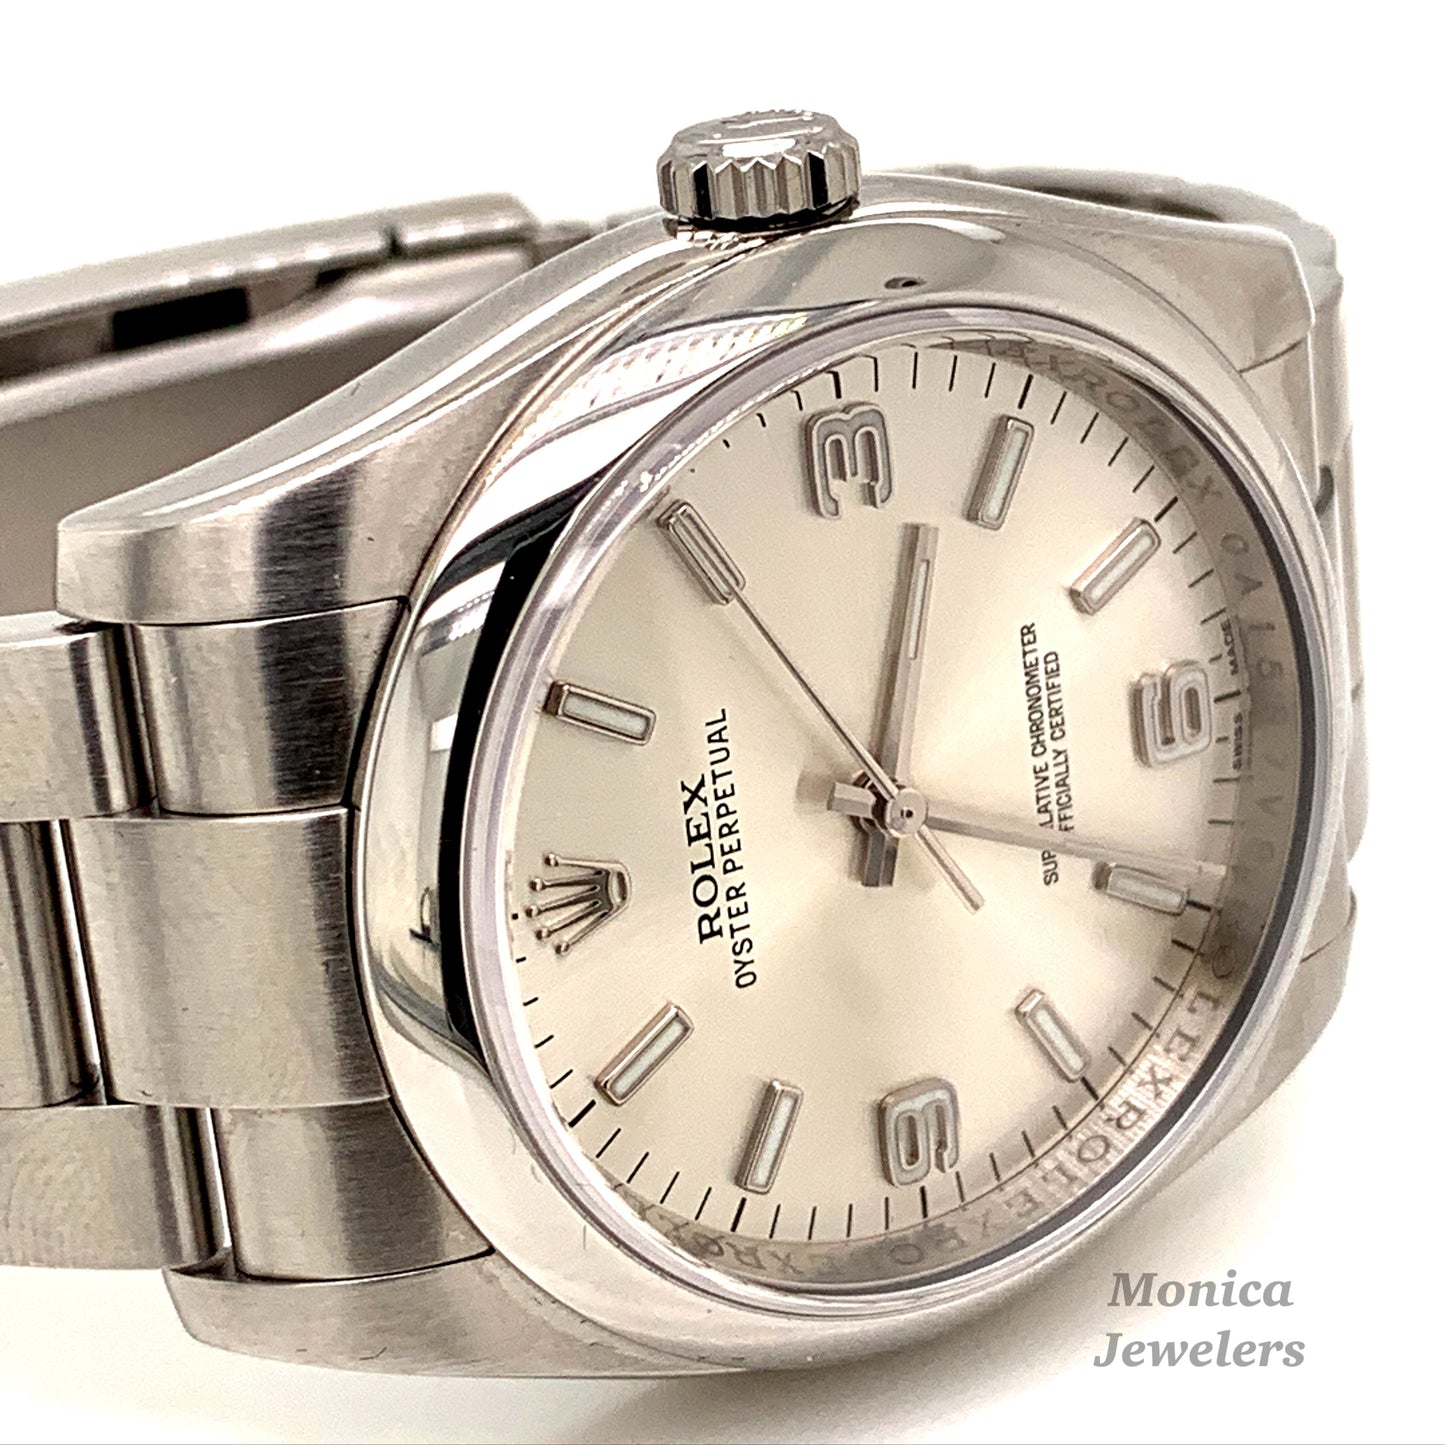 Rolex 116000 Stainless Steel 36mm Silver Arabic stick dial with smooth bezel